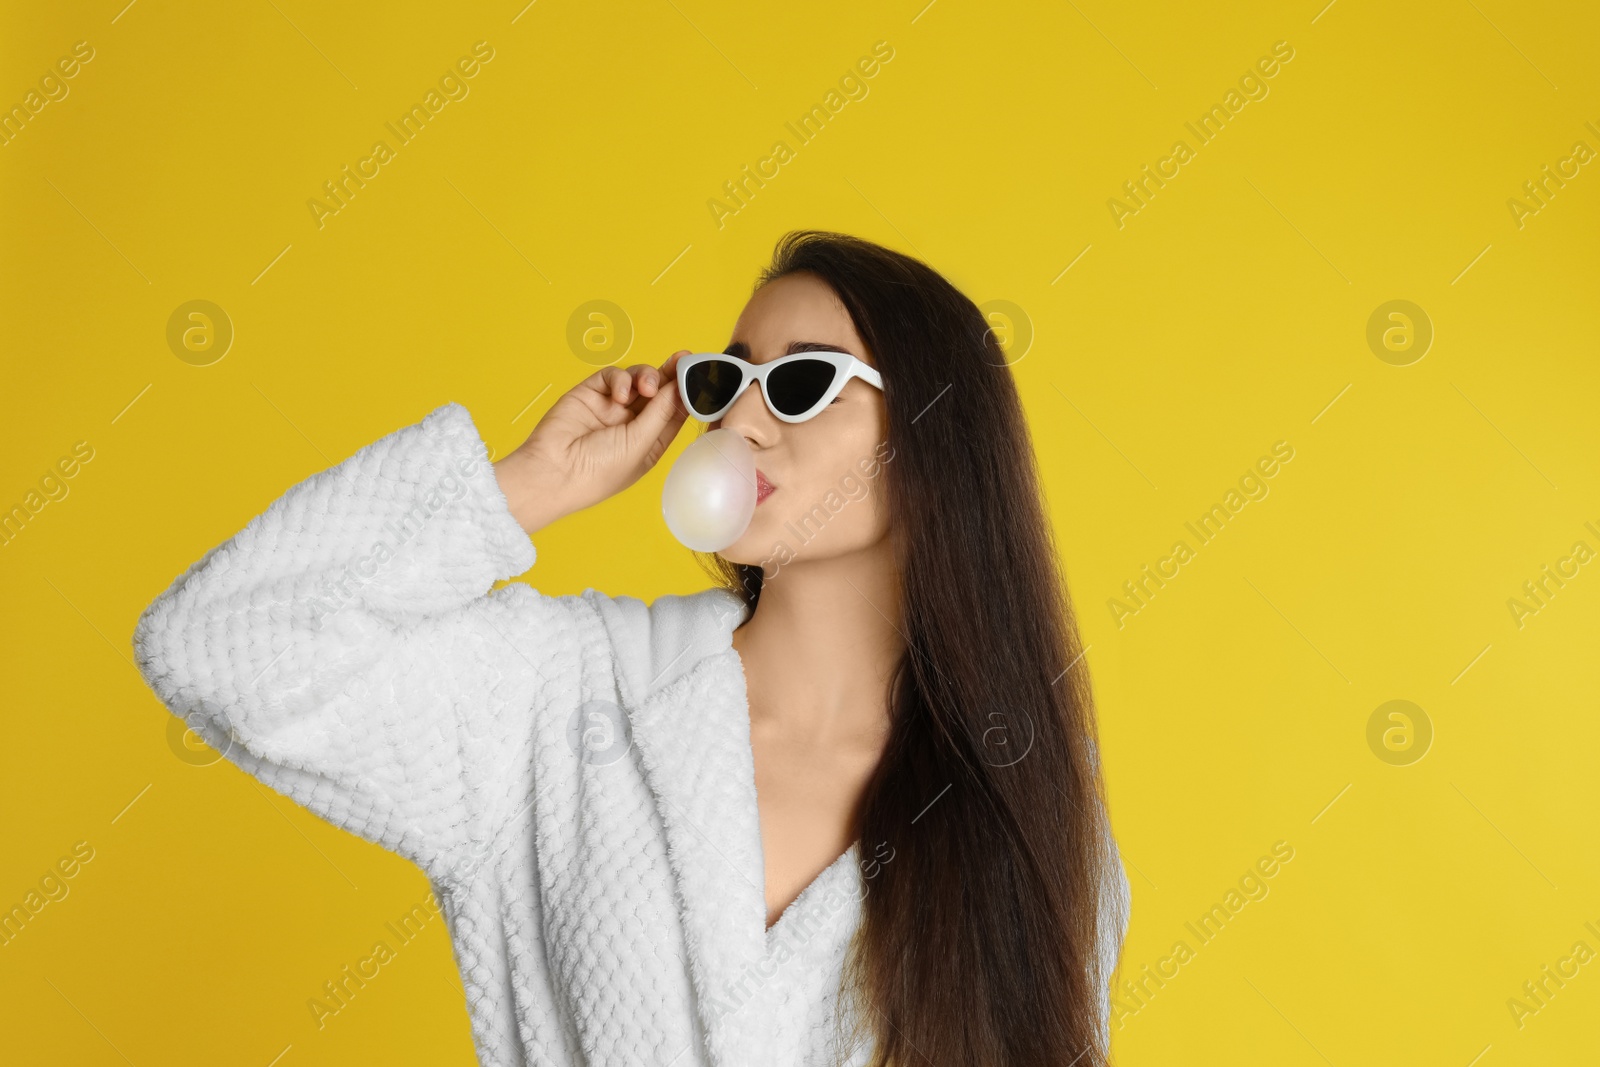 Photo of Young woman in bathrobe and sunglasses blowing chewing gum on yellow background